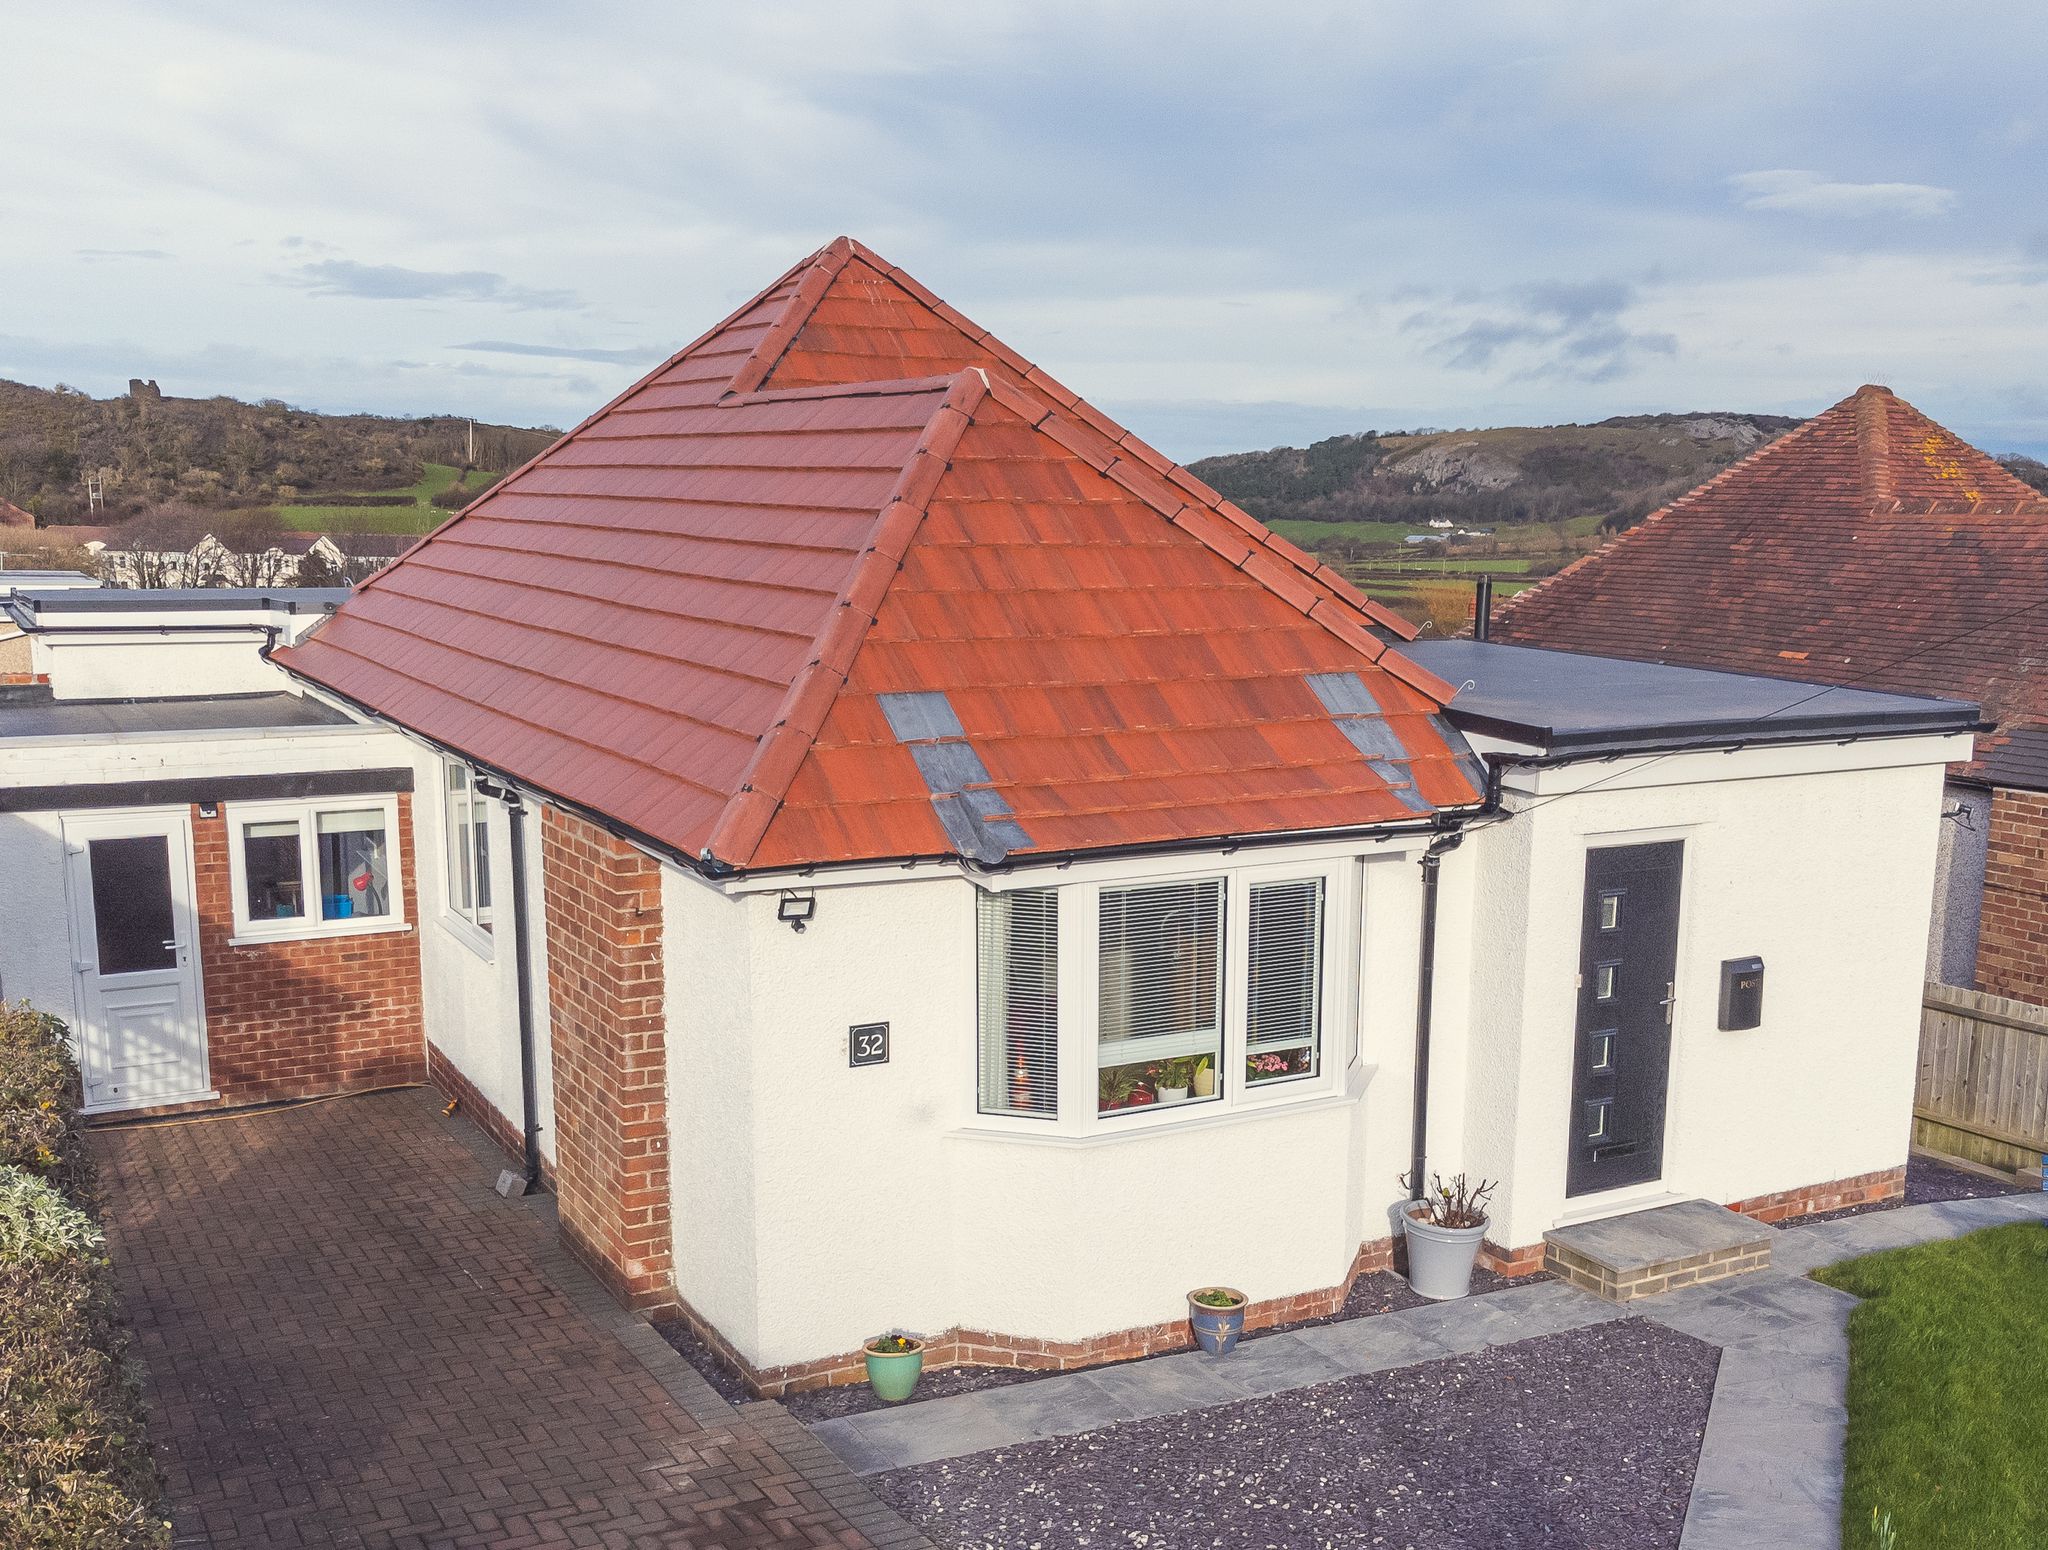 Tile Roof Contractors Clwt-y-bont, LL55 - DD Roofing